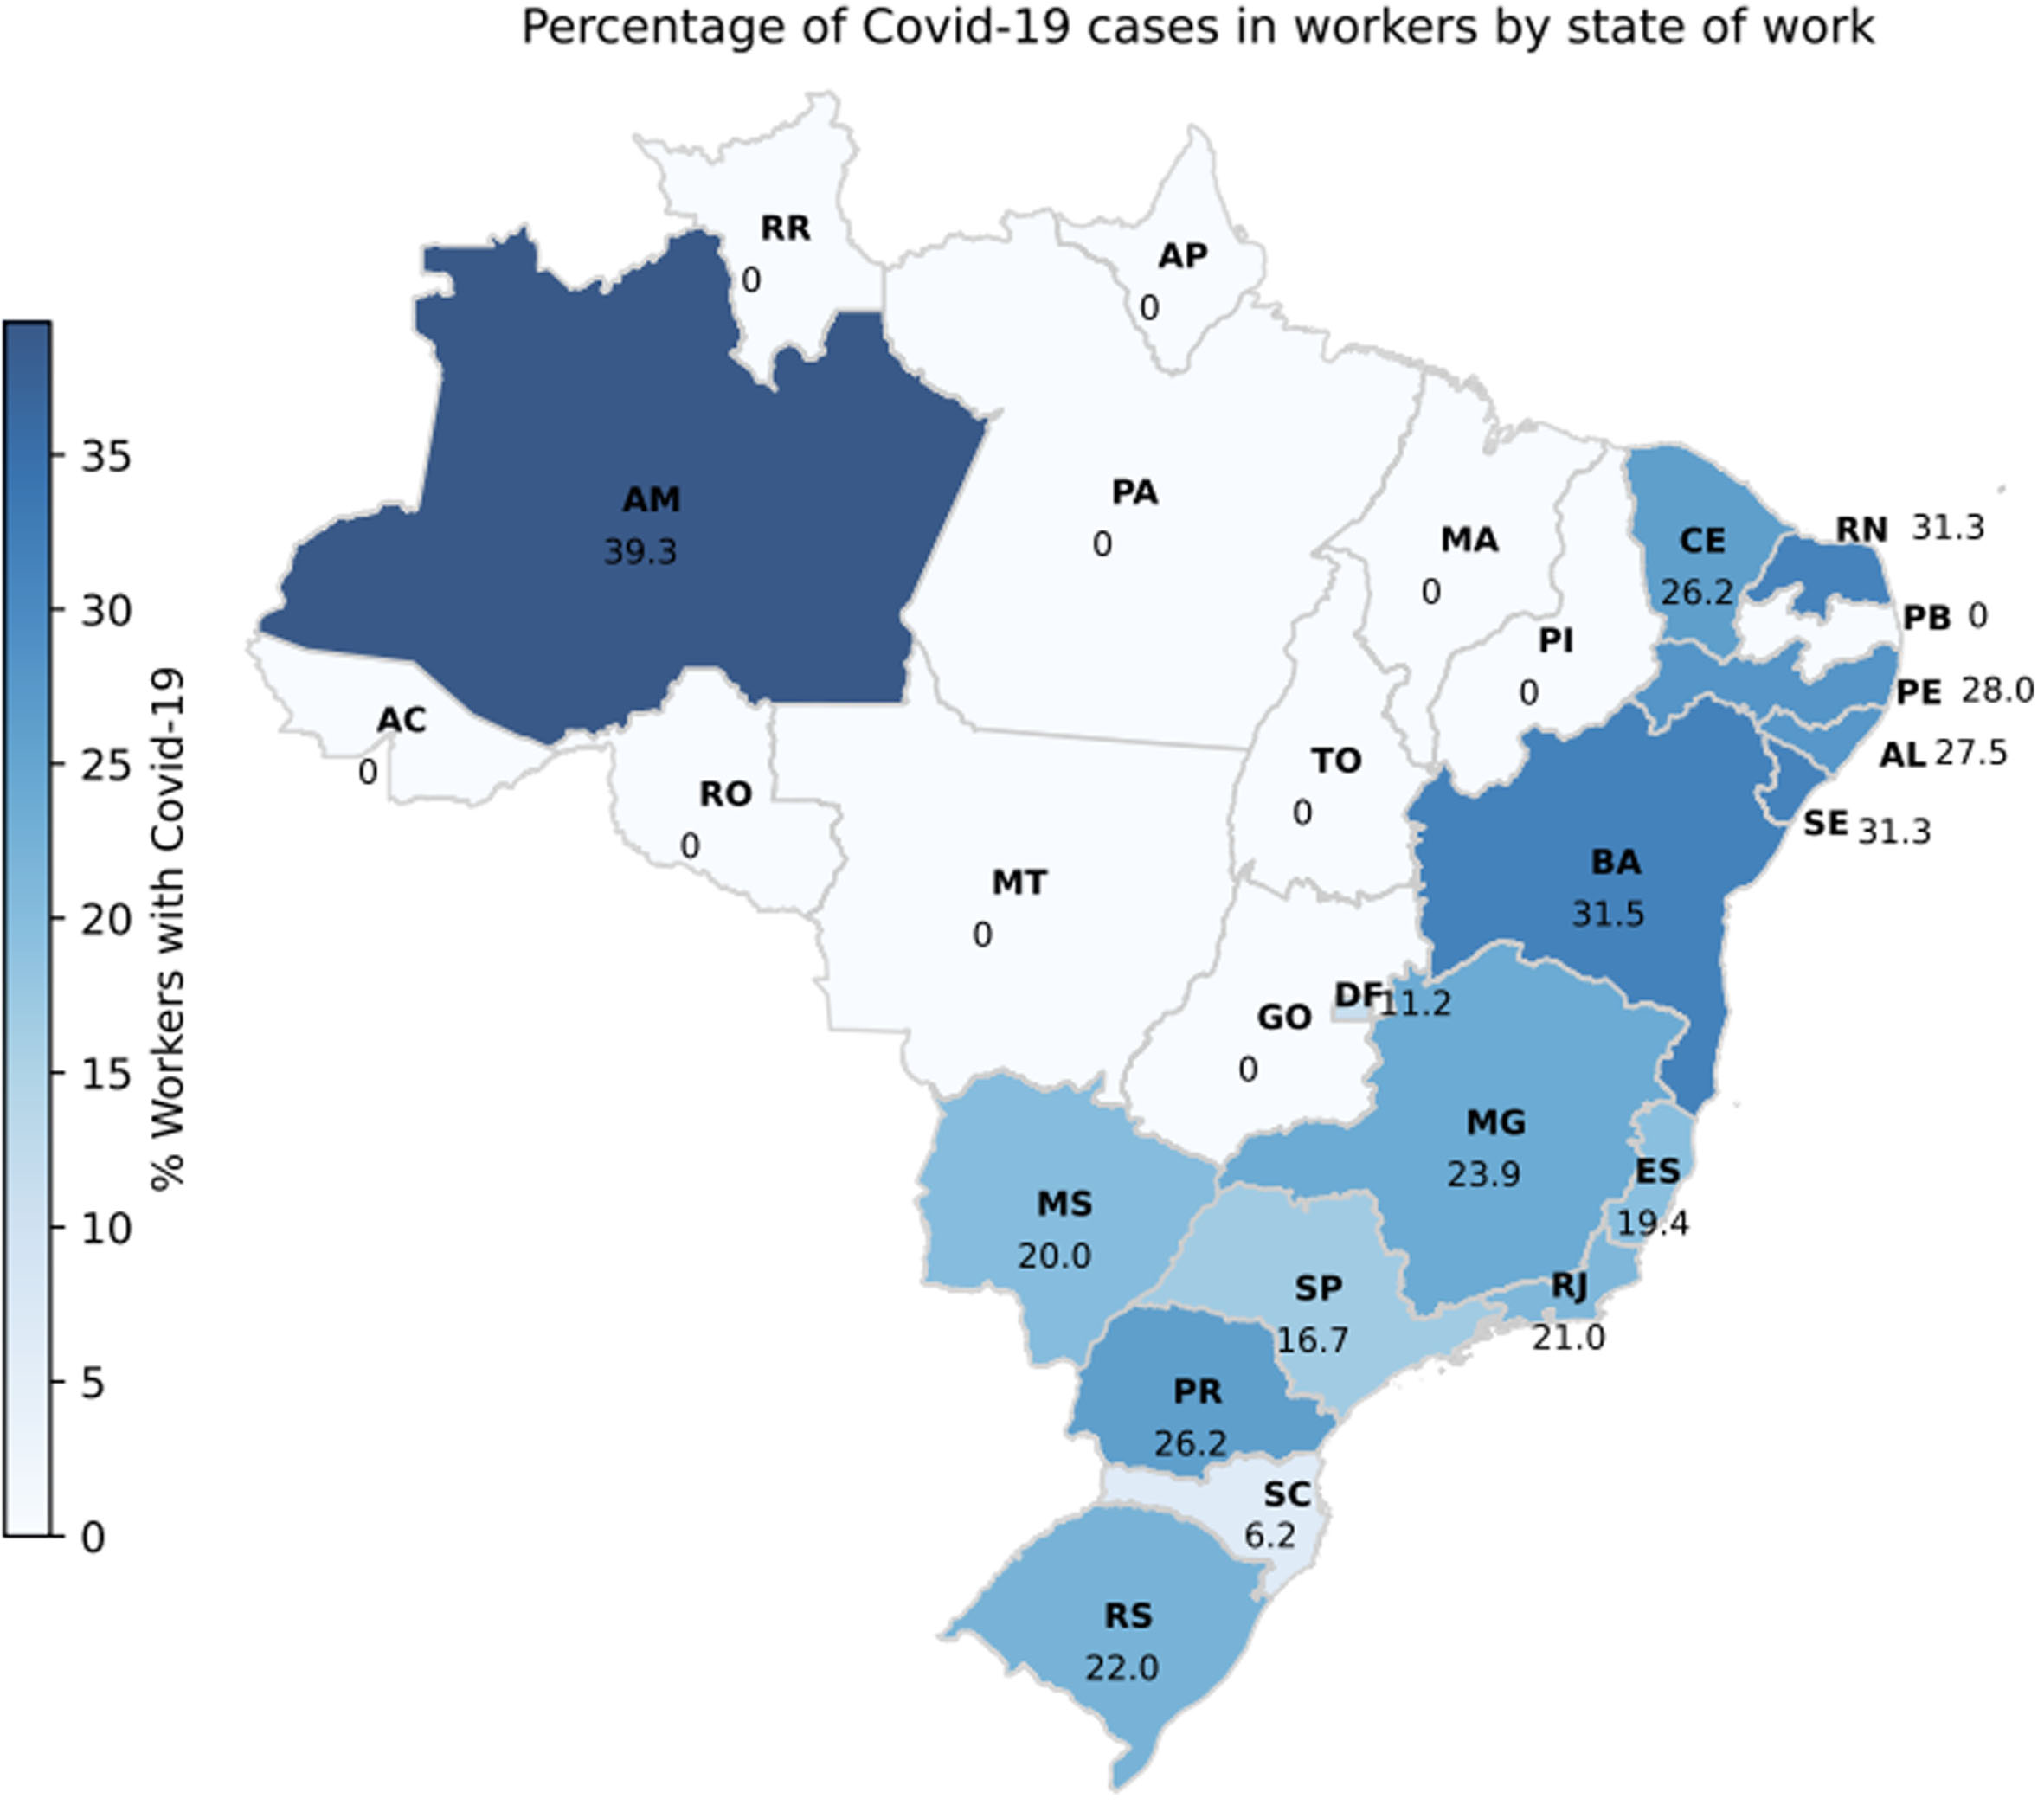 Percentage of workers with COVID-19 from June 2020 to June 2021 by state of work, in an oil and gas company in Brazil.